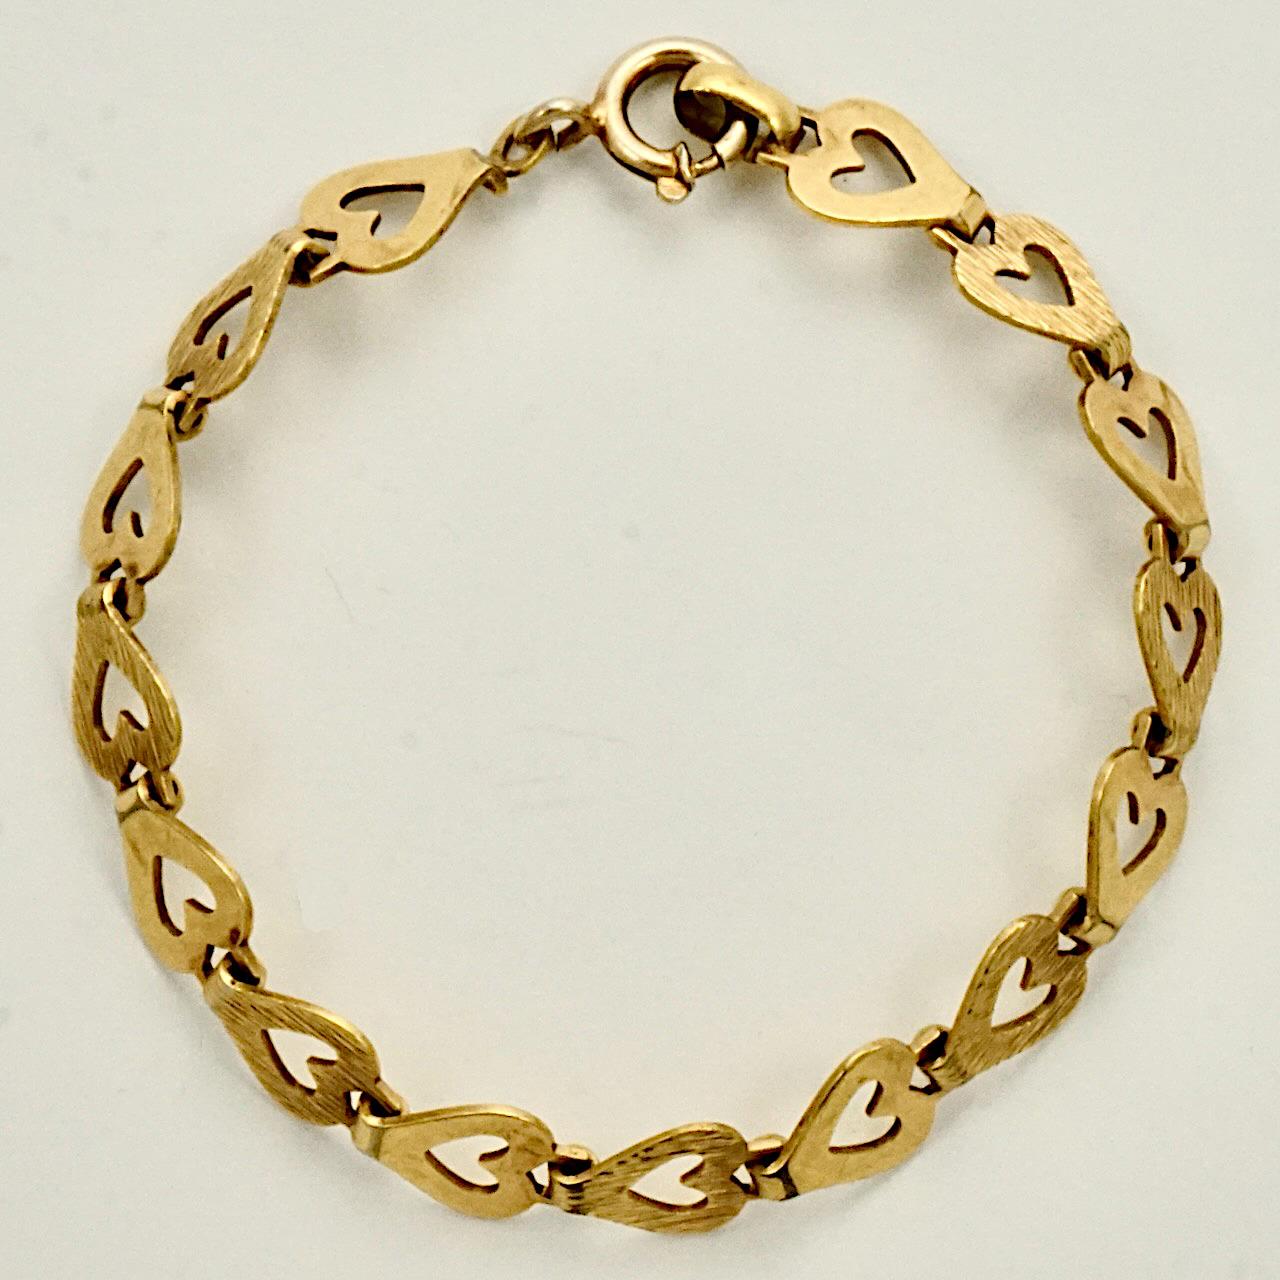 Women's or Men's Andreas Daub Gold Plated Open Heart Textured and Shiny Link Bracelet For Sale